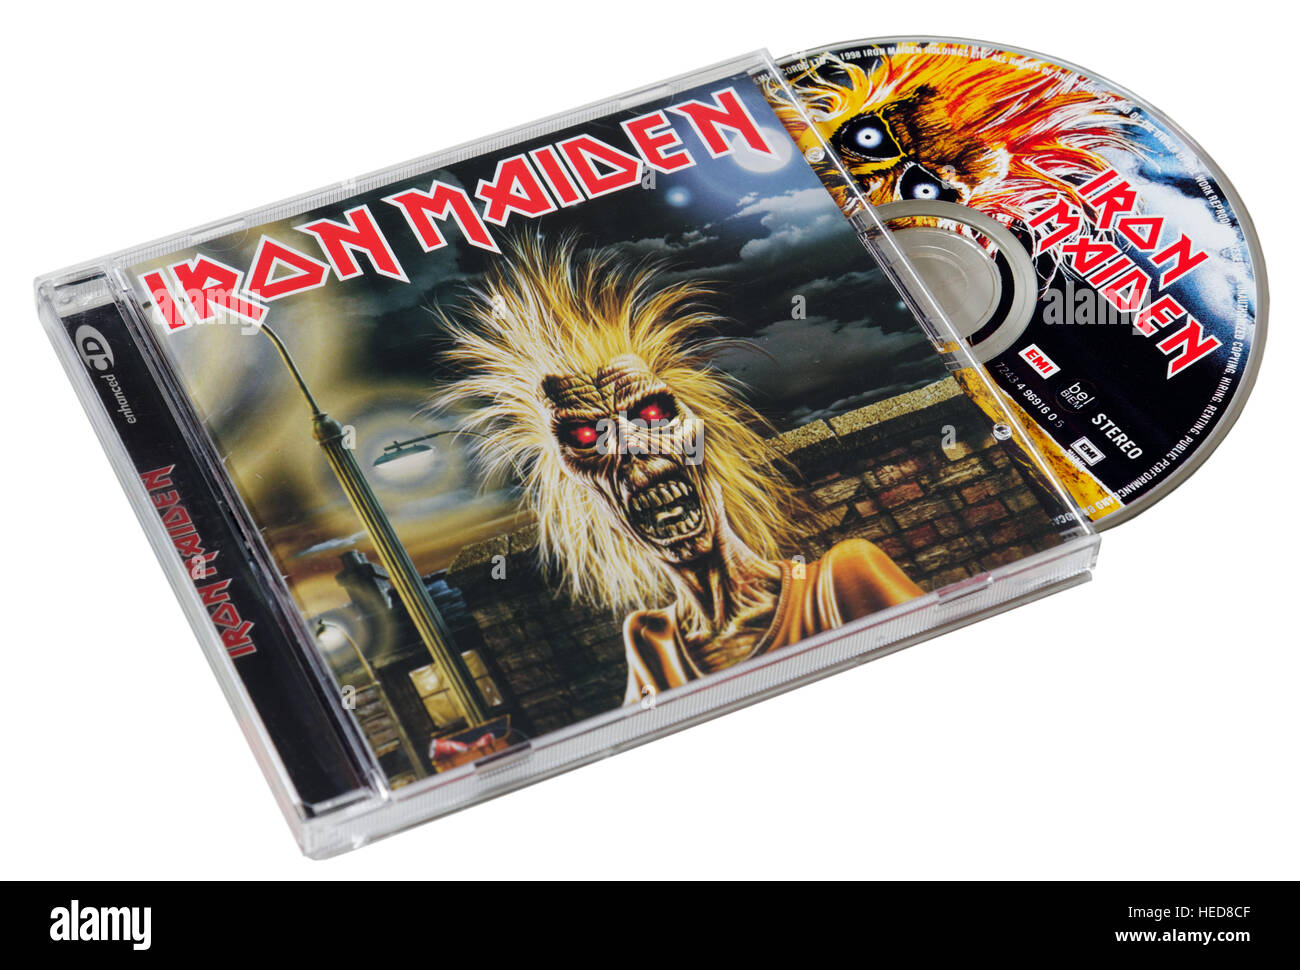 Iron Maiden first self titled CD Stock Photo